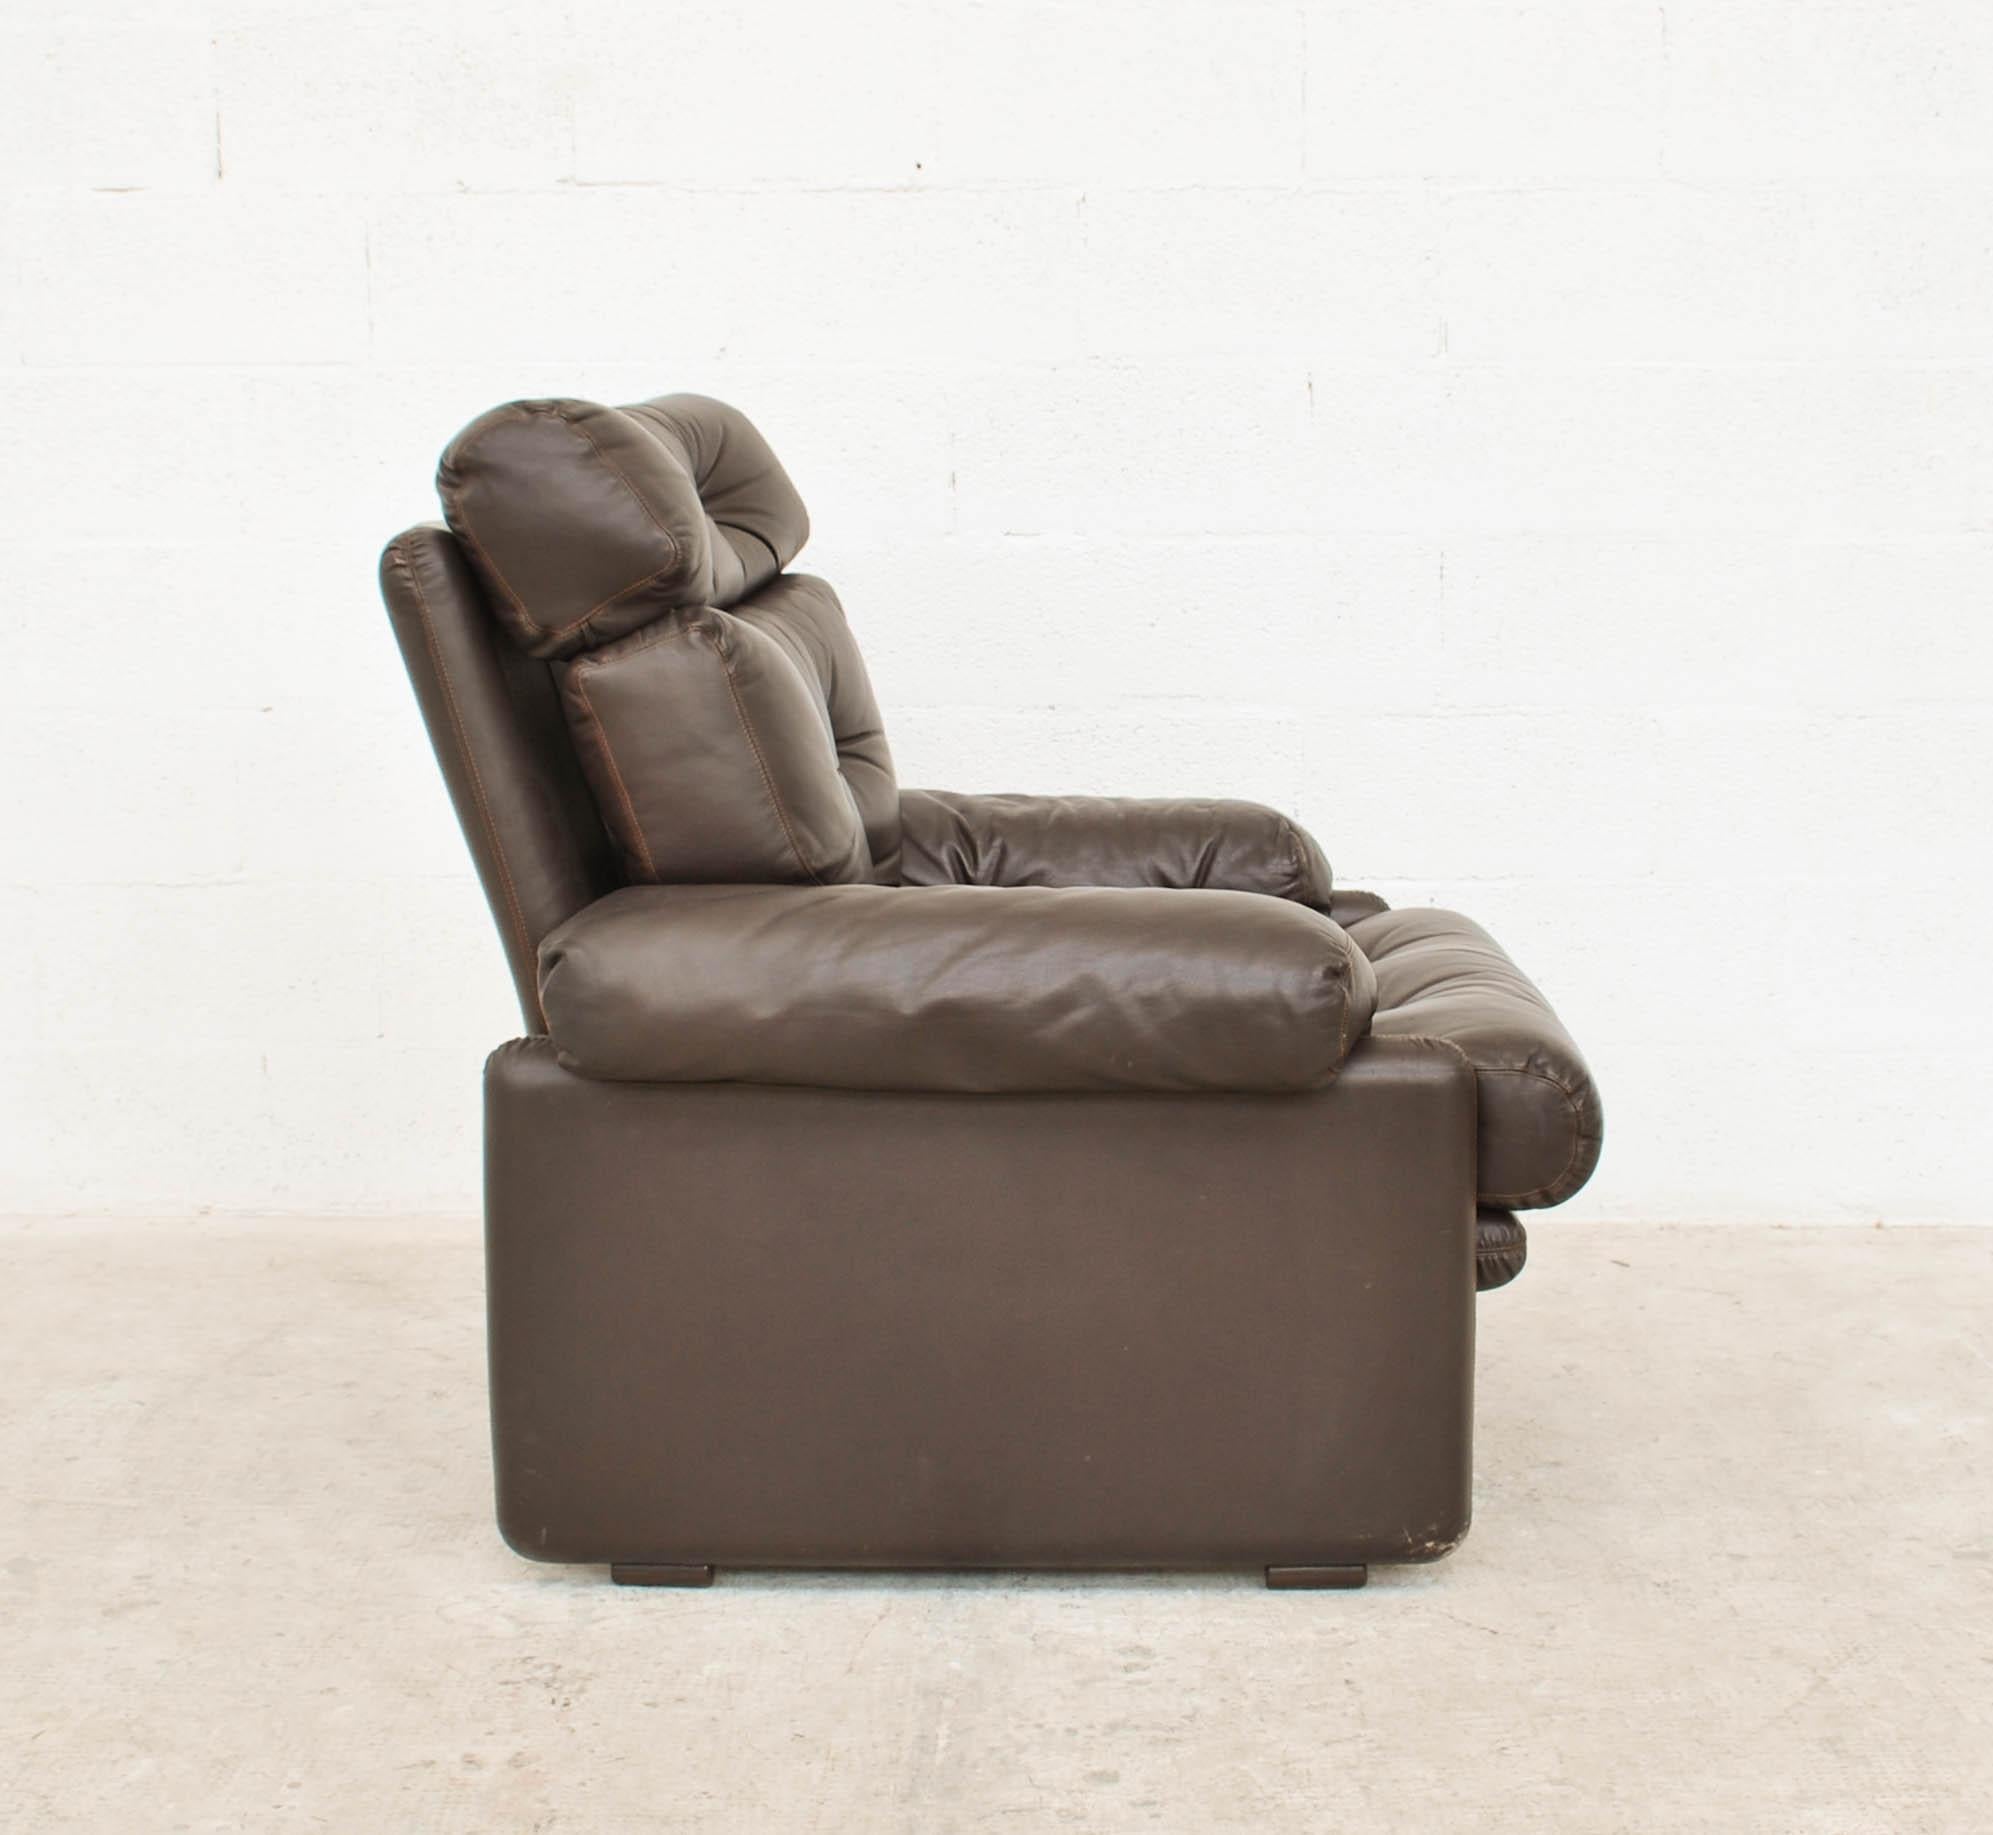 70s
Design Afra e Tobia Scarpa
Producer B&B Italia
Coronado high back armchair
color dark brown
Good condition:
barely used with minimal signs of aging and wear
Dimensions: L 90 cm - D 80 cm - H 78 cm.
 